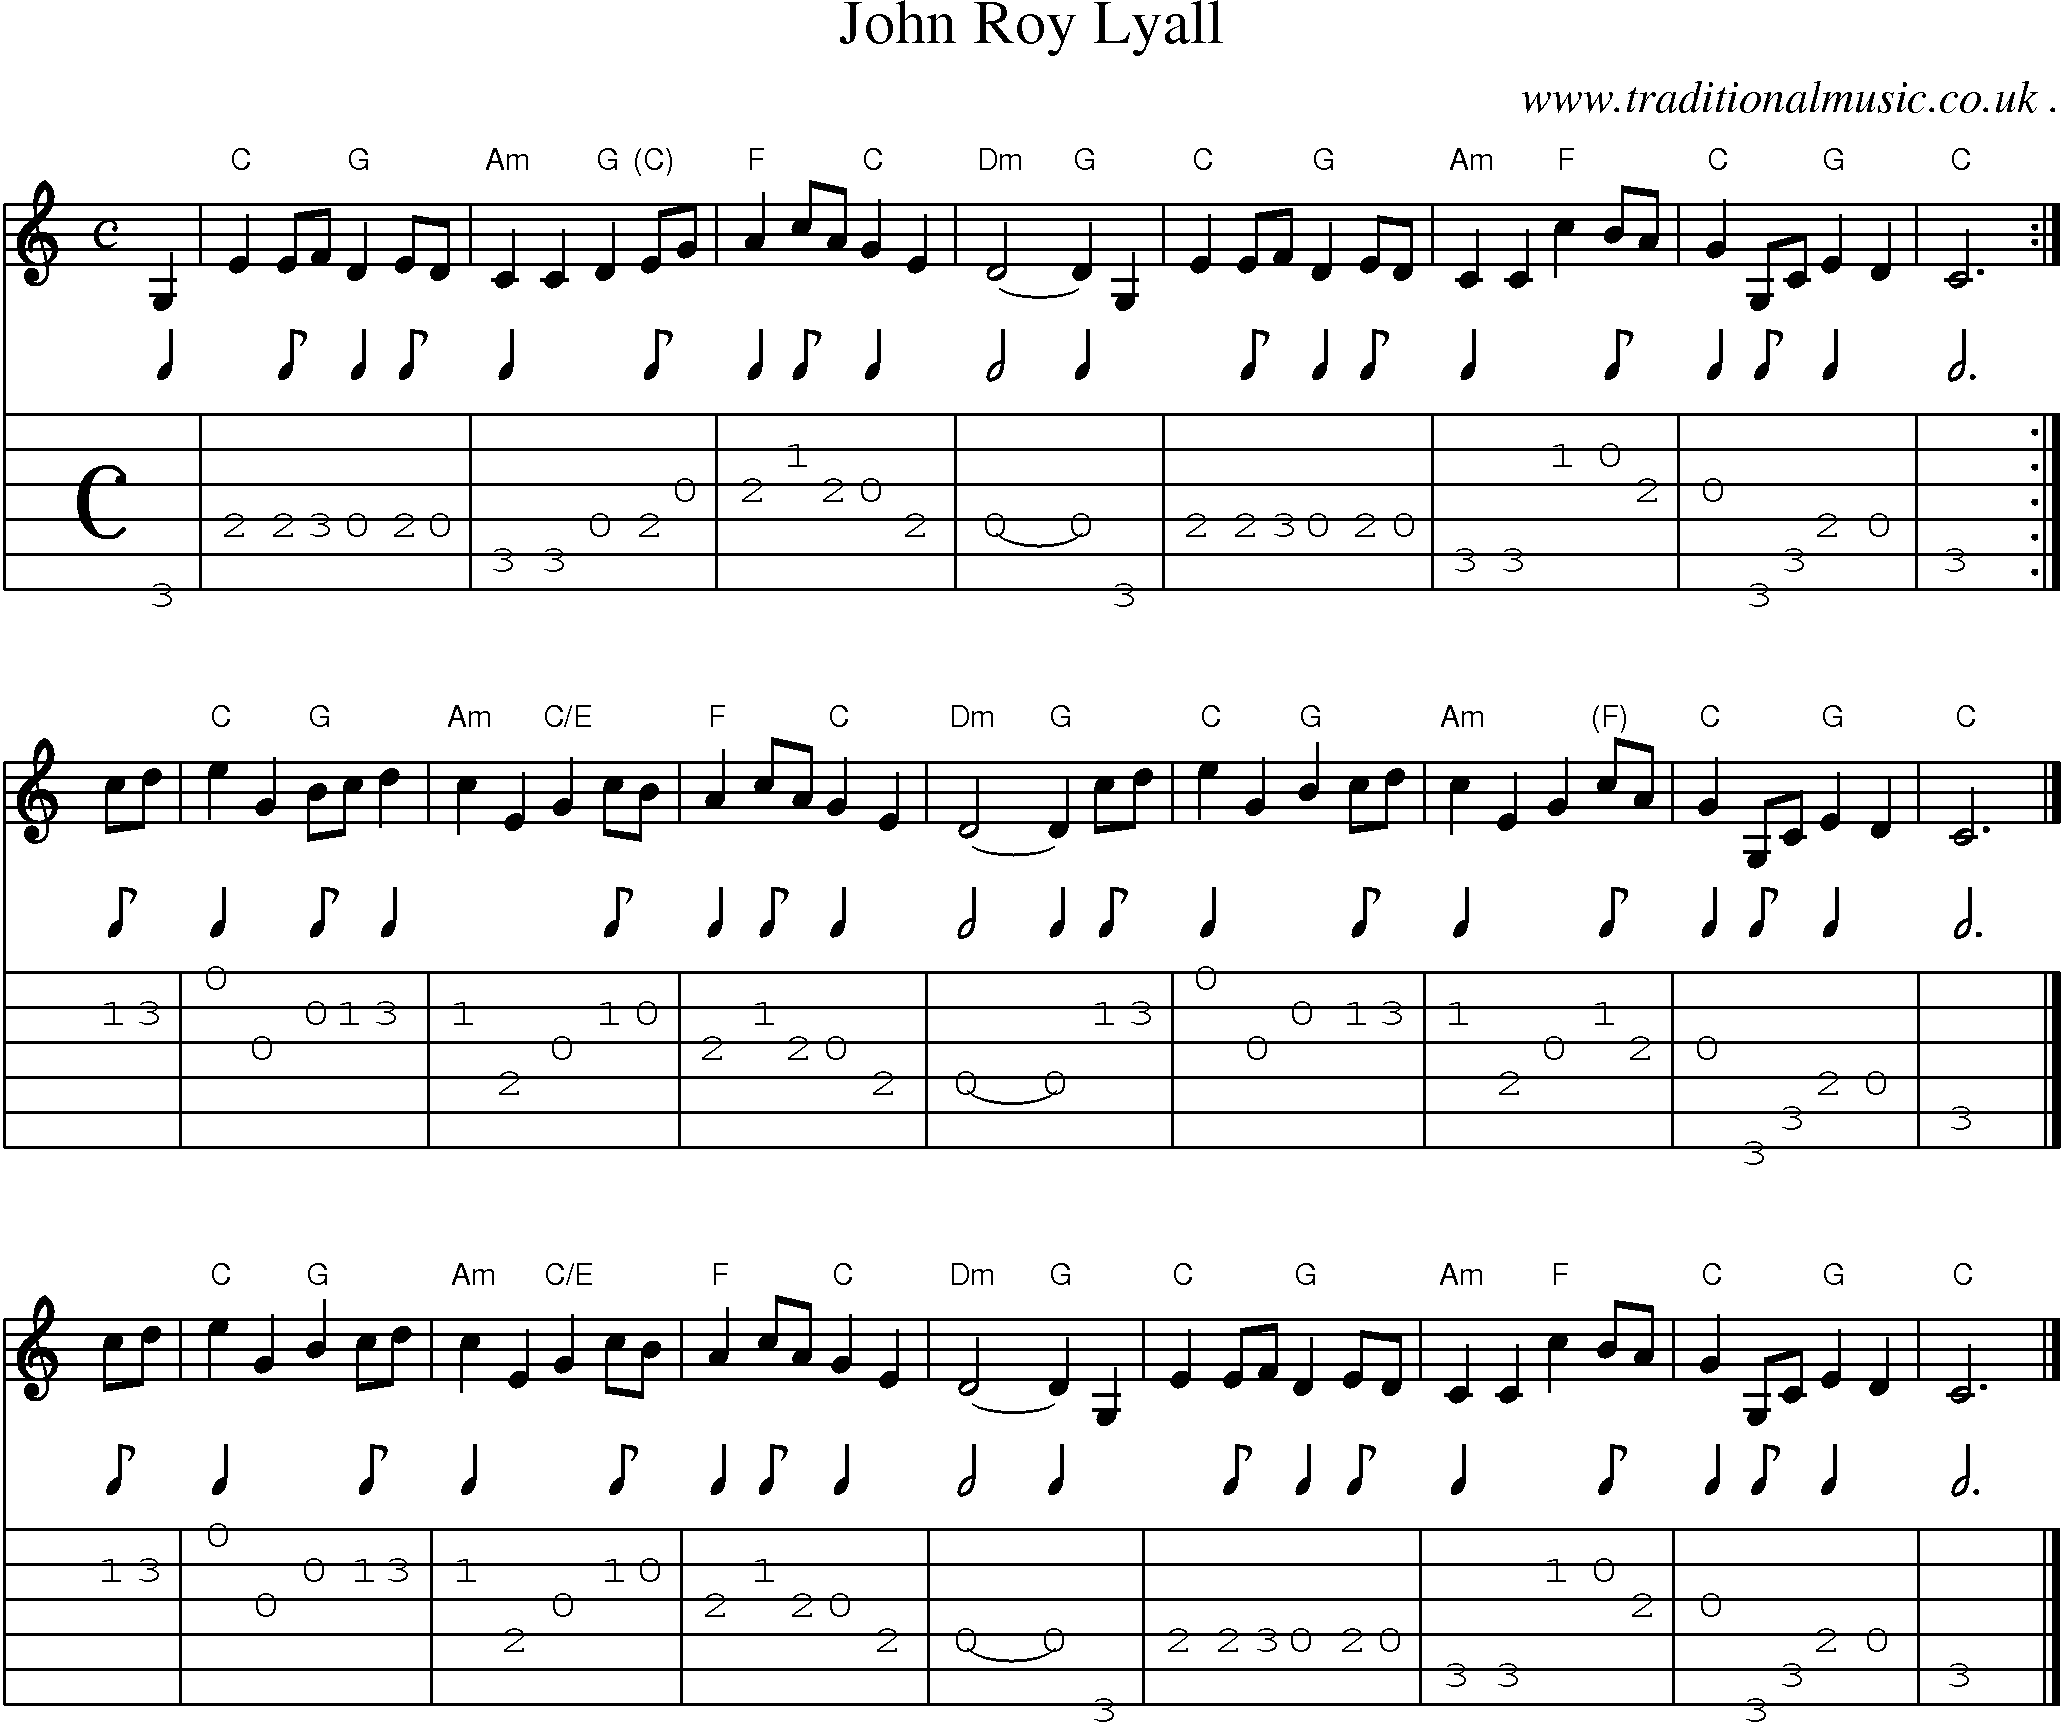 Sheet-music  score, Chords and Guitar Tabs for John Roy Lyall